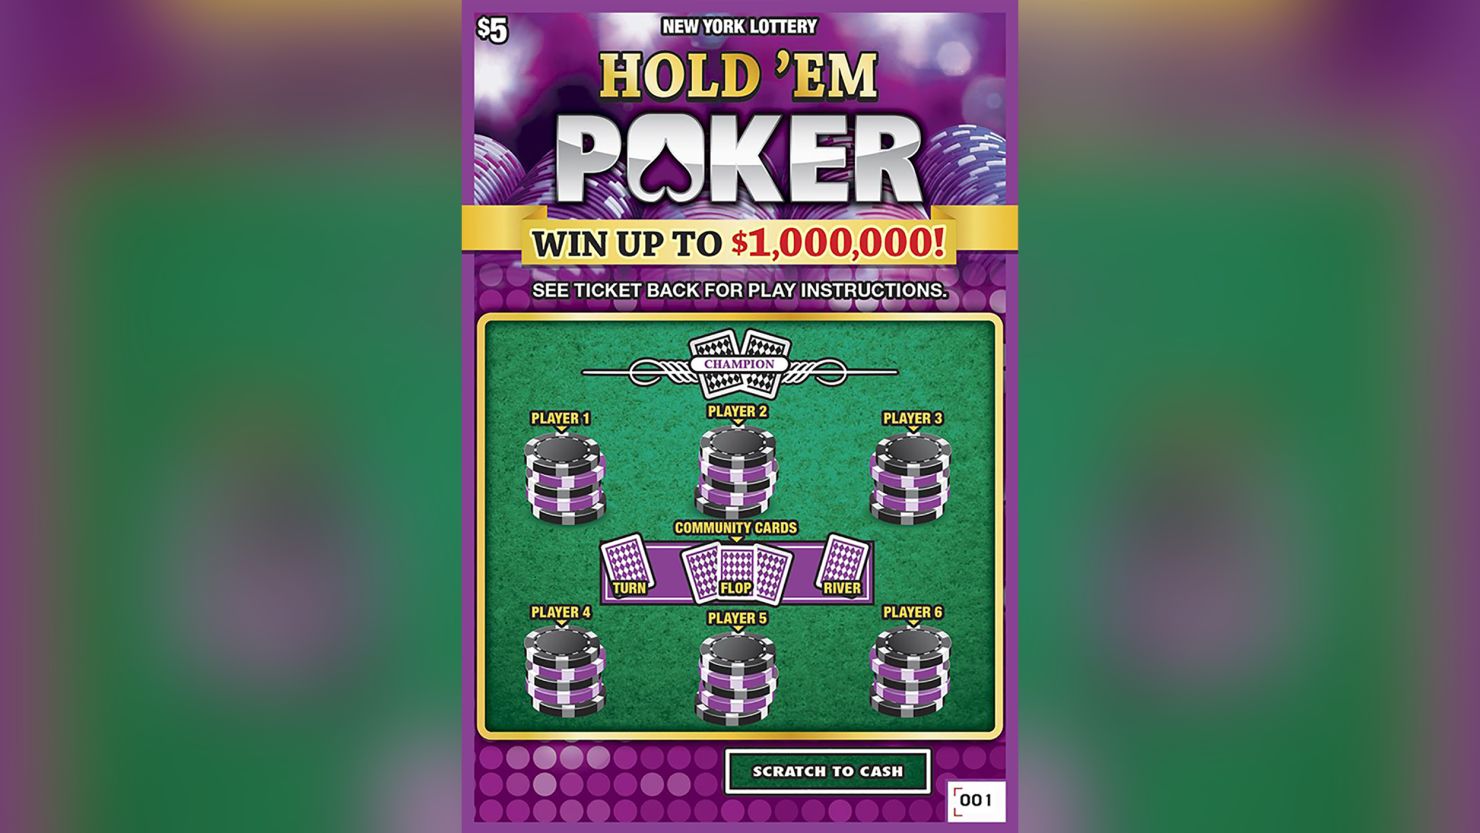 An example of the 'Hold'em Poker' ticket from the New York Lottery. 